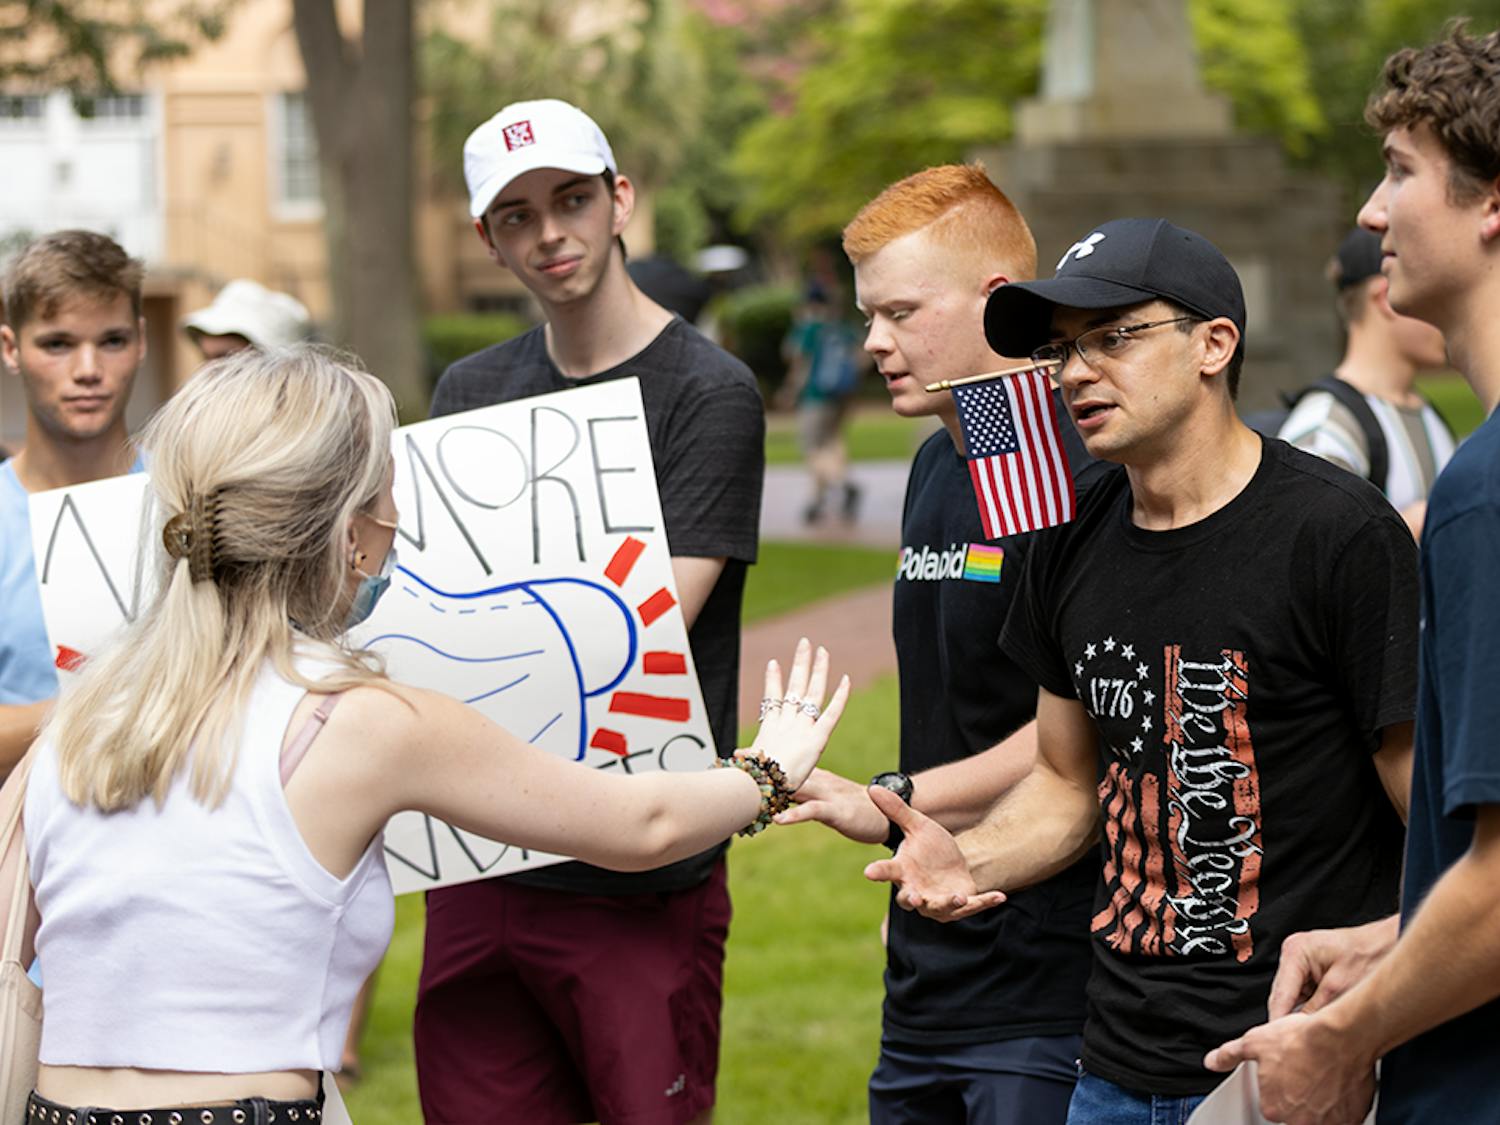 The USC Turning Point USA chapter members and members of the Carolina Socialists debate on the Horseshoe on their stances of the mask mandate. The mask mandate was put in place by interim president Harris Pastides on Aug. 18, 2021.